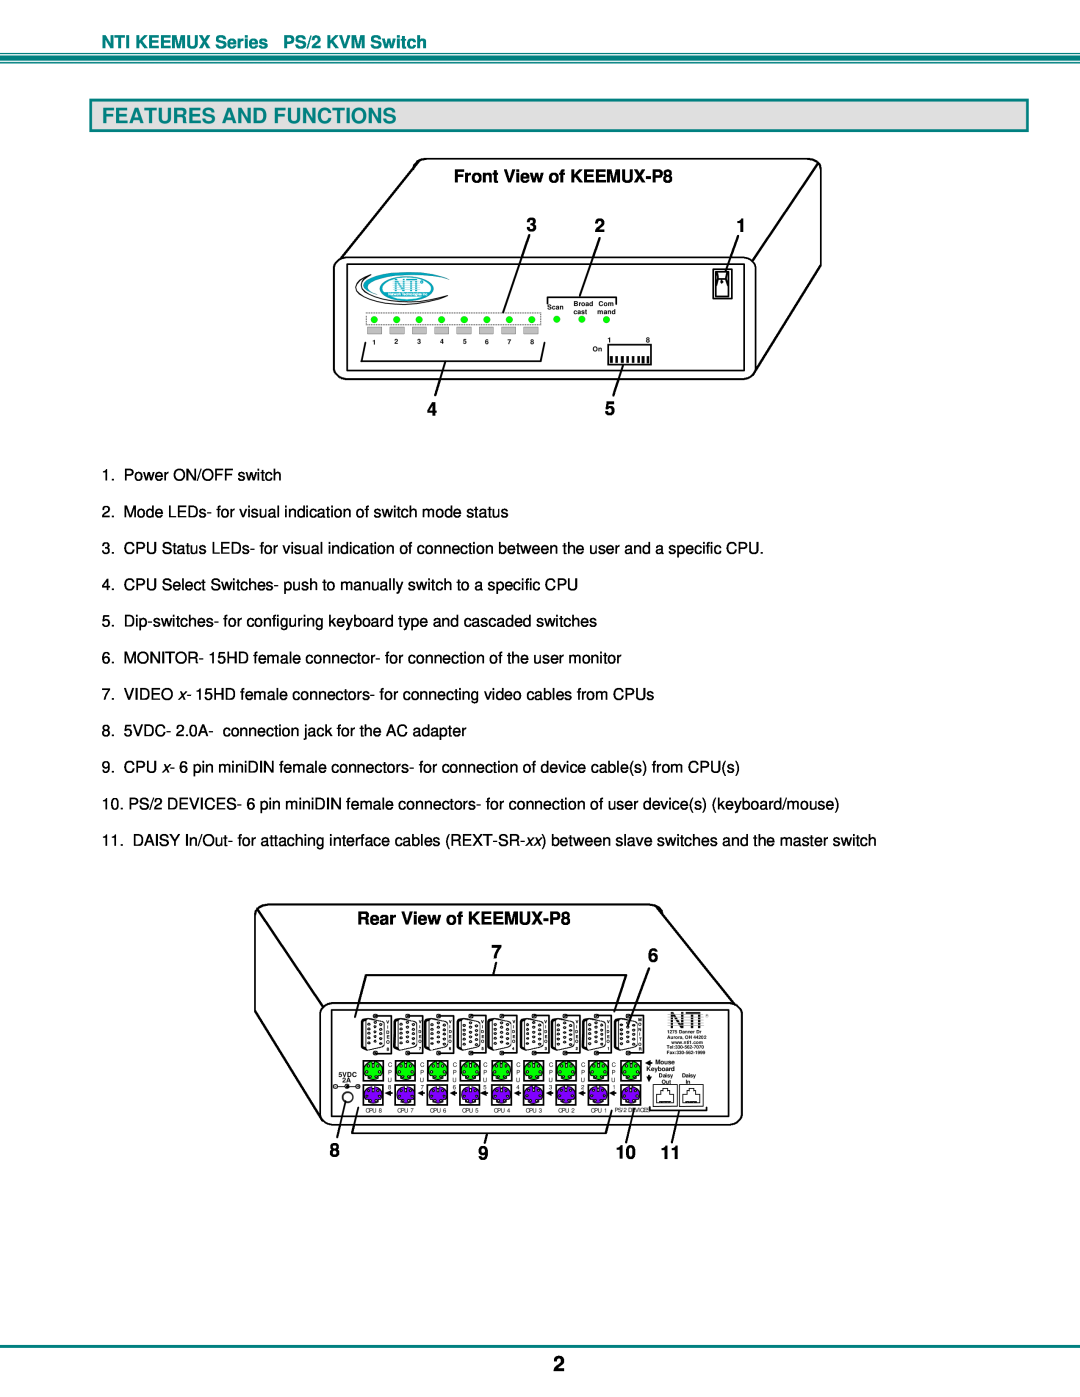 Network Technologies PS/2 KVM operation manual Features And Functions 